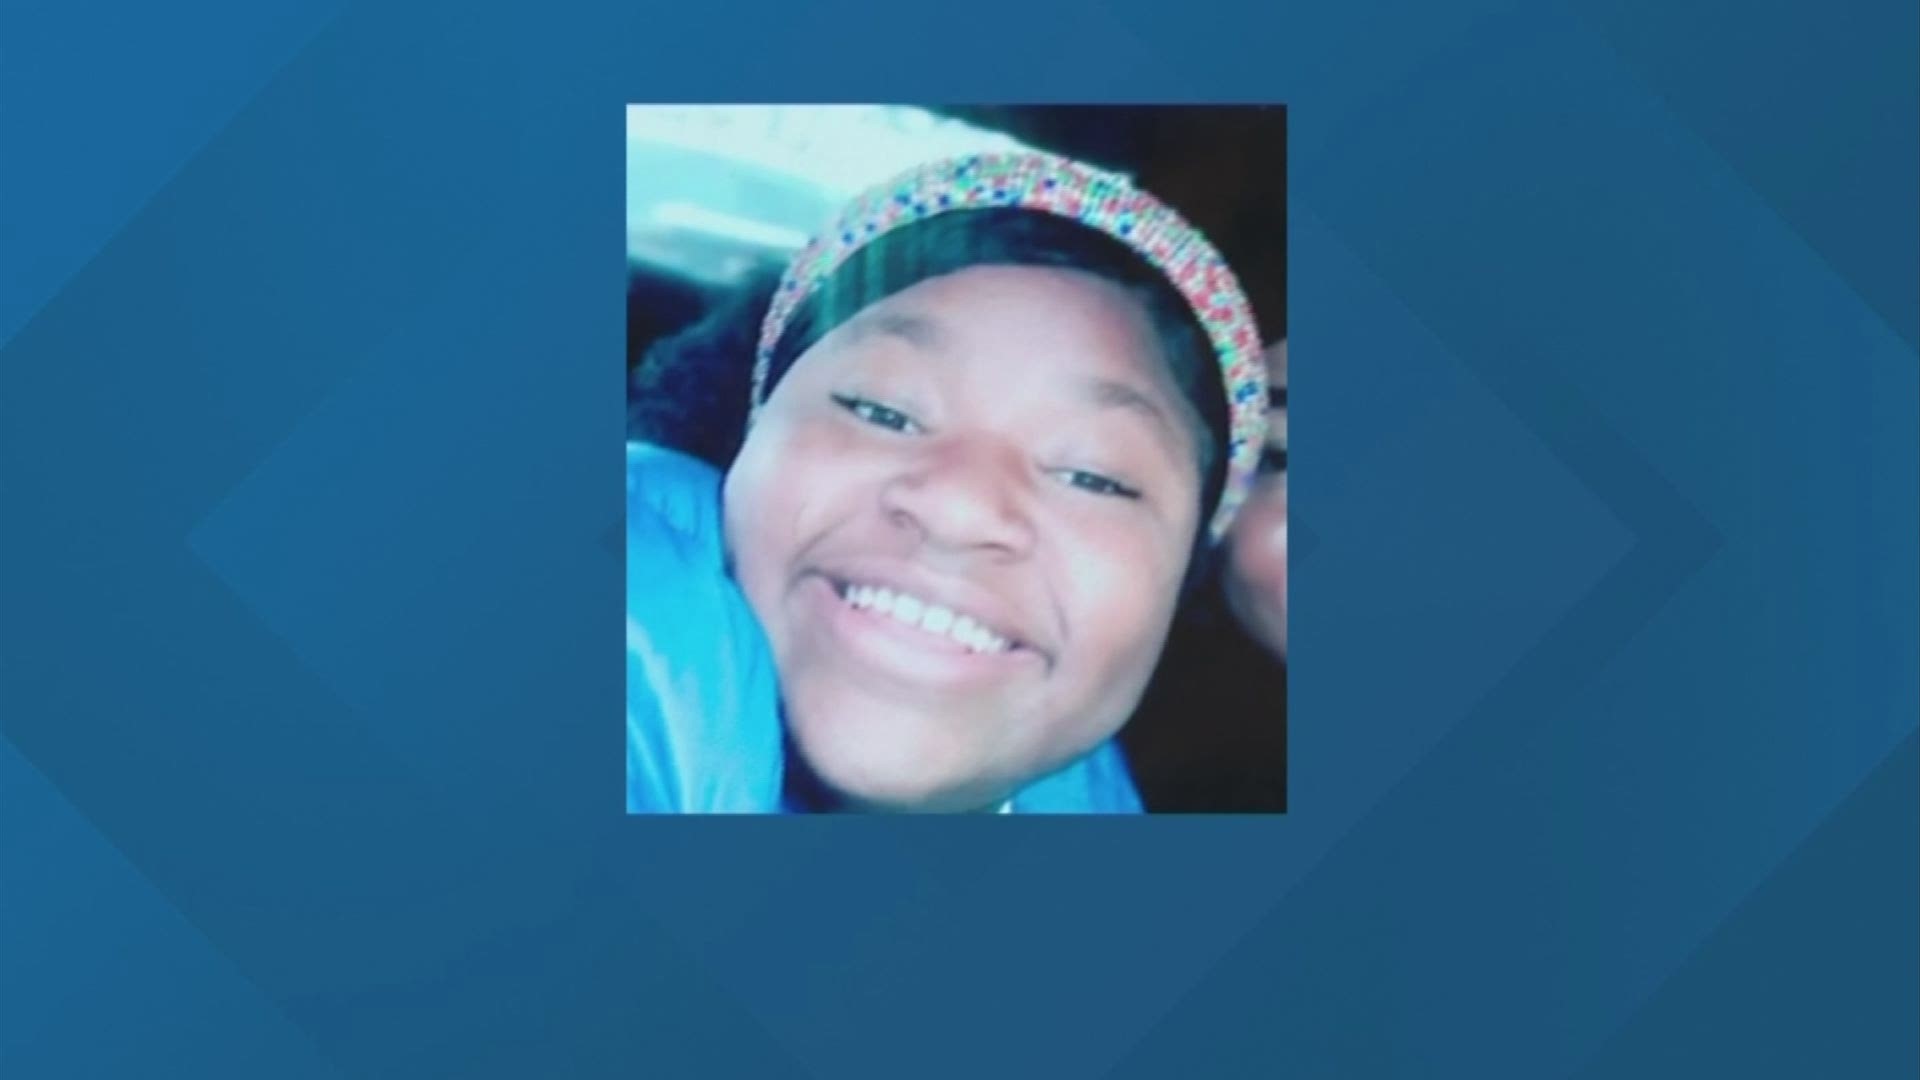 We're expecting more information today about the shooting of 16-year-old Ma'khia Bryant by a Columbus Police Officer.